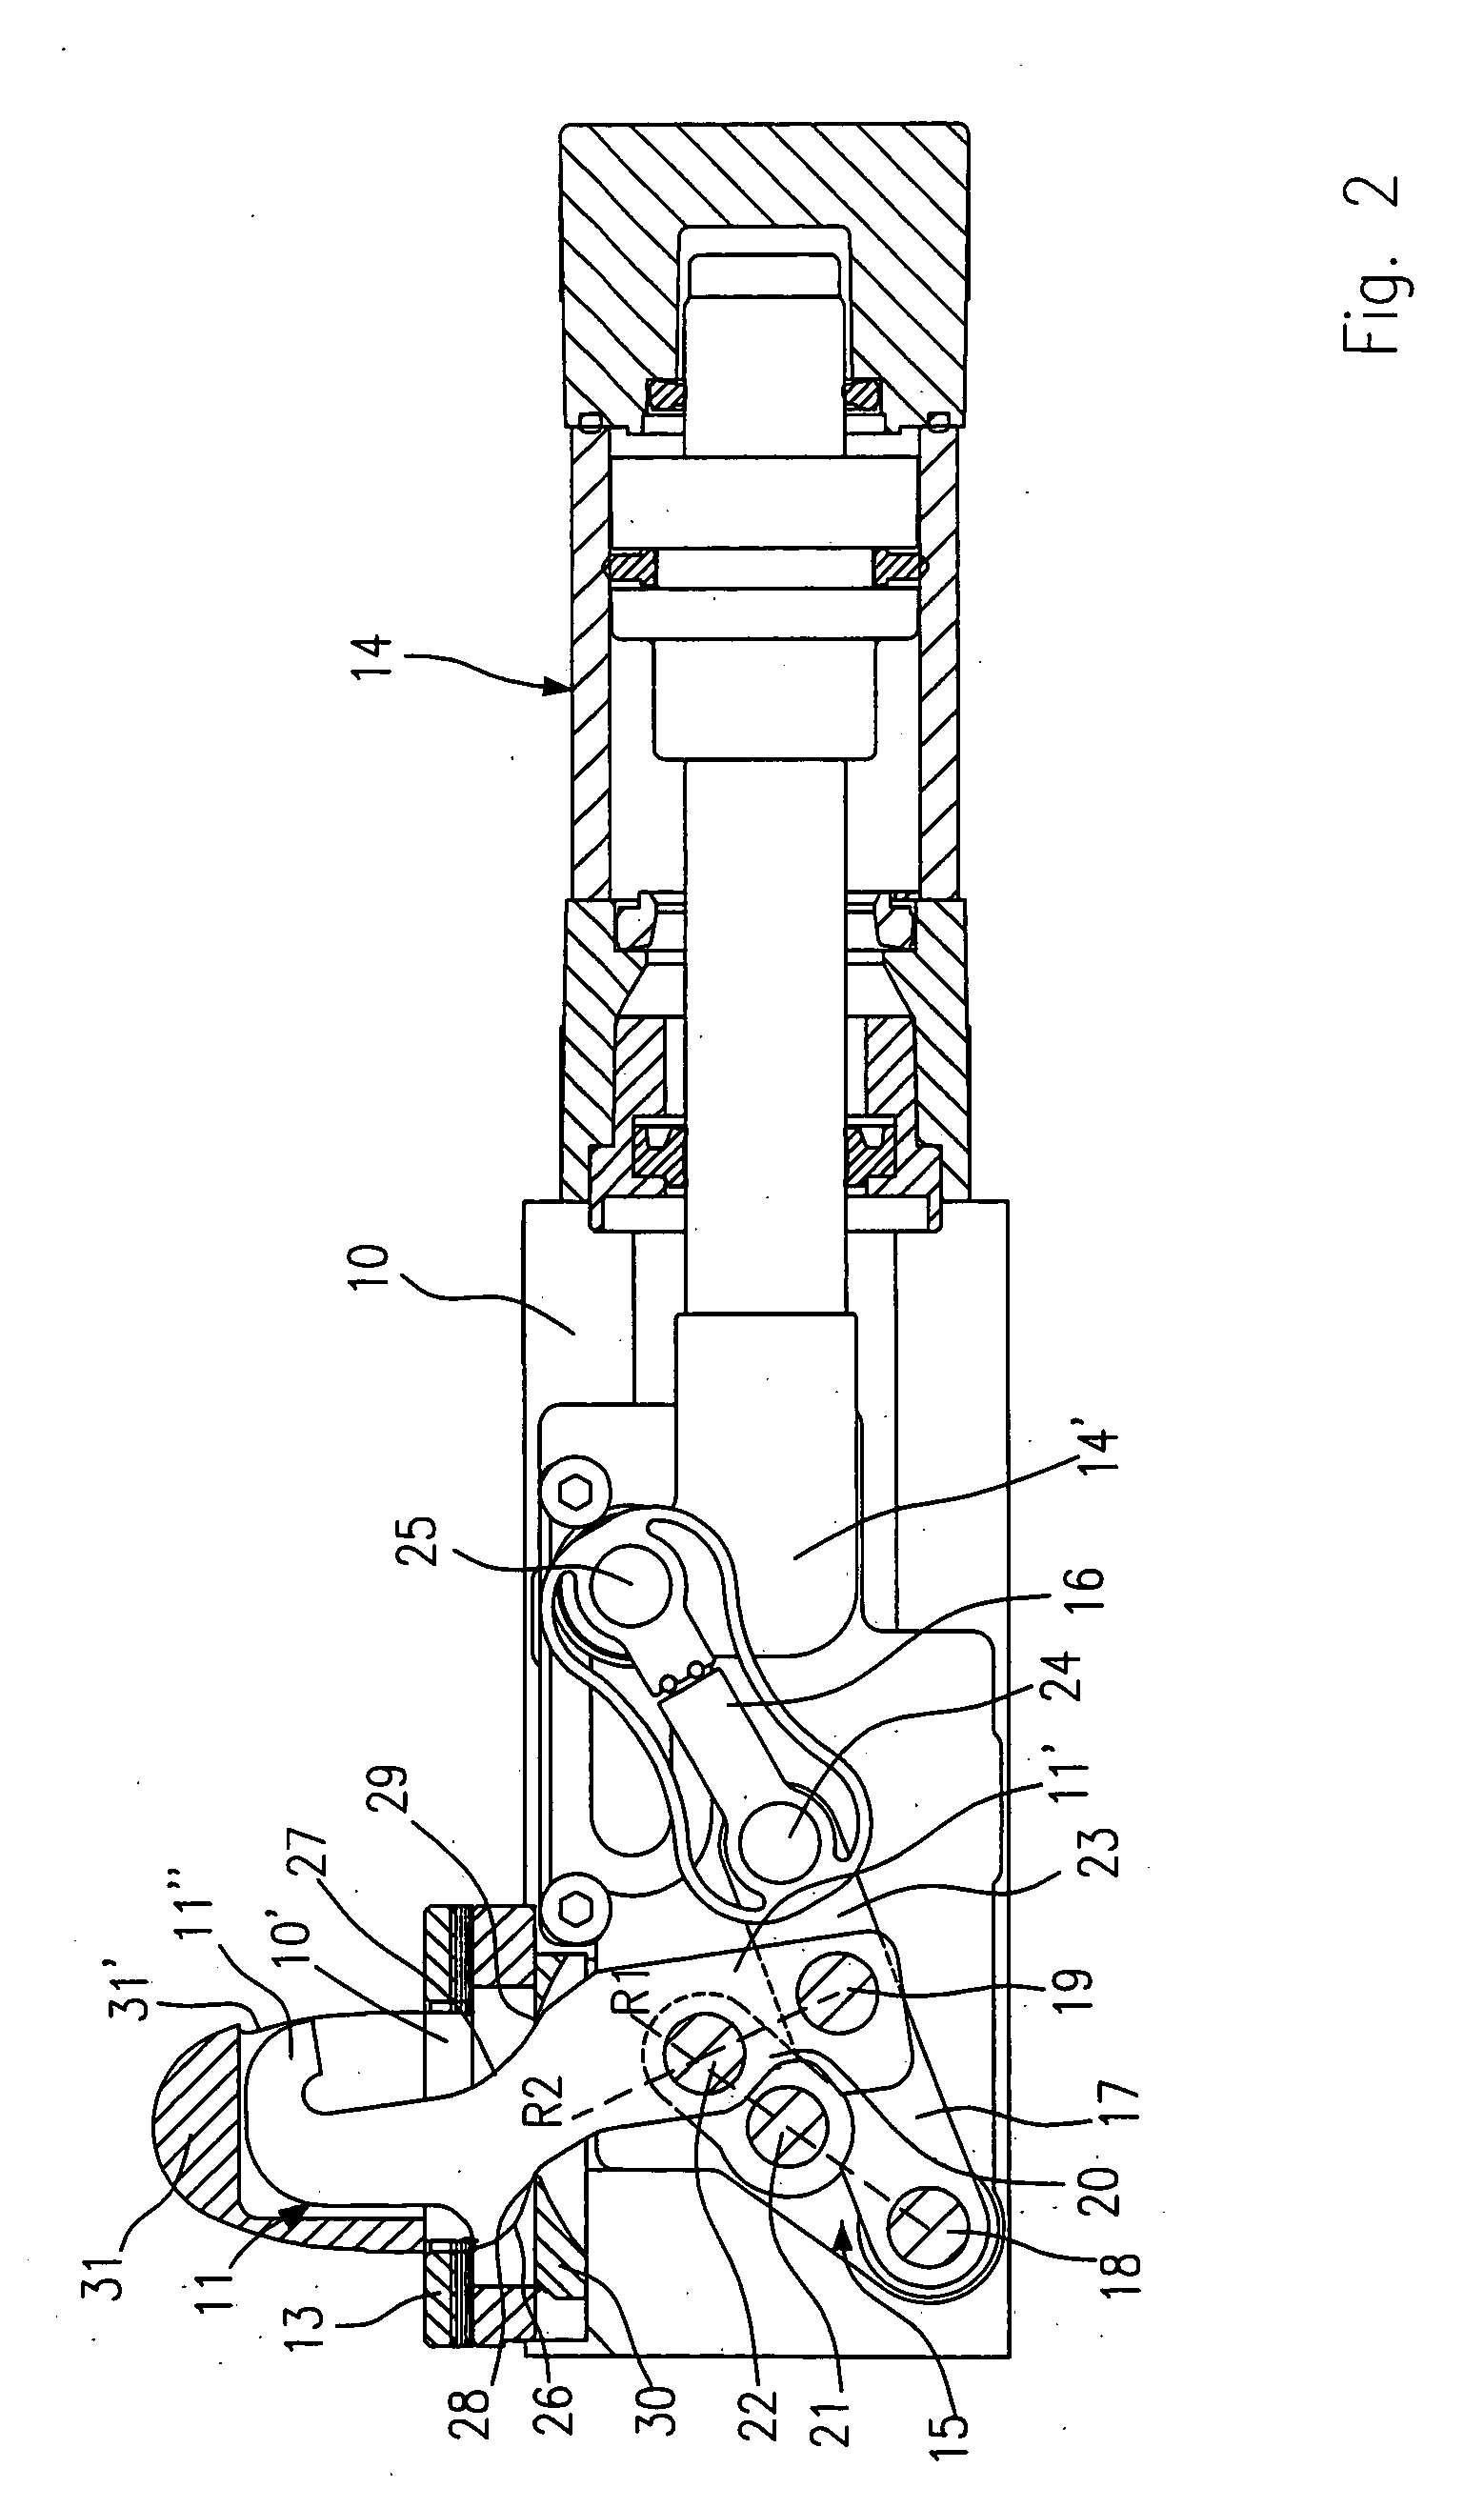 Compact clamping device with side clamping member